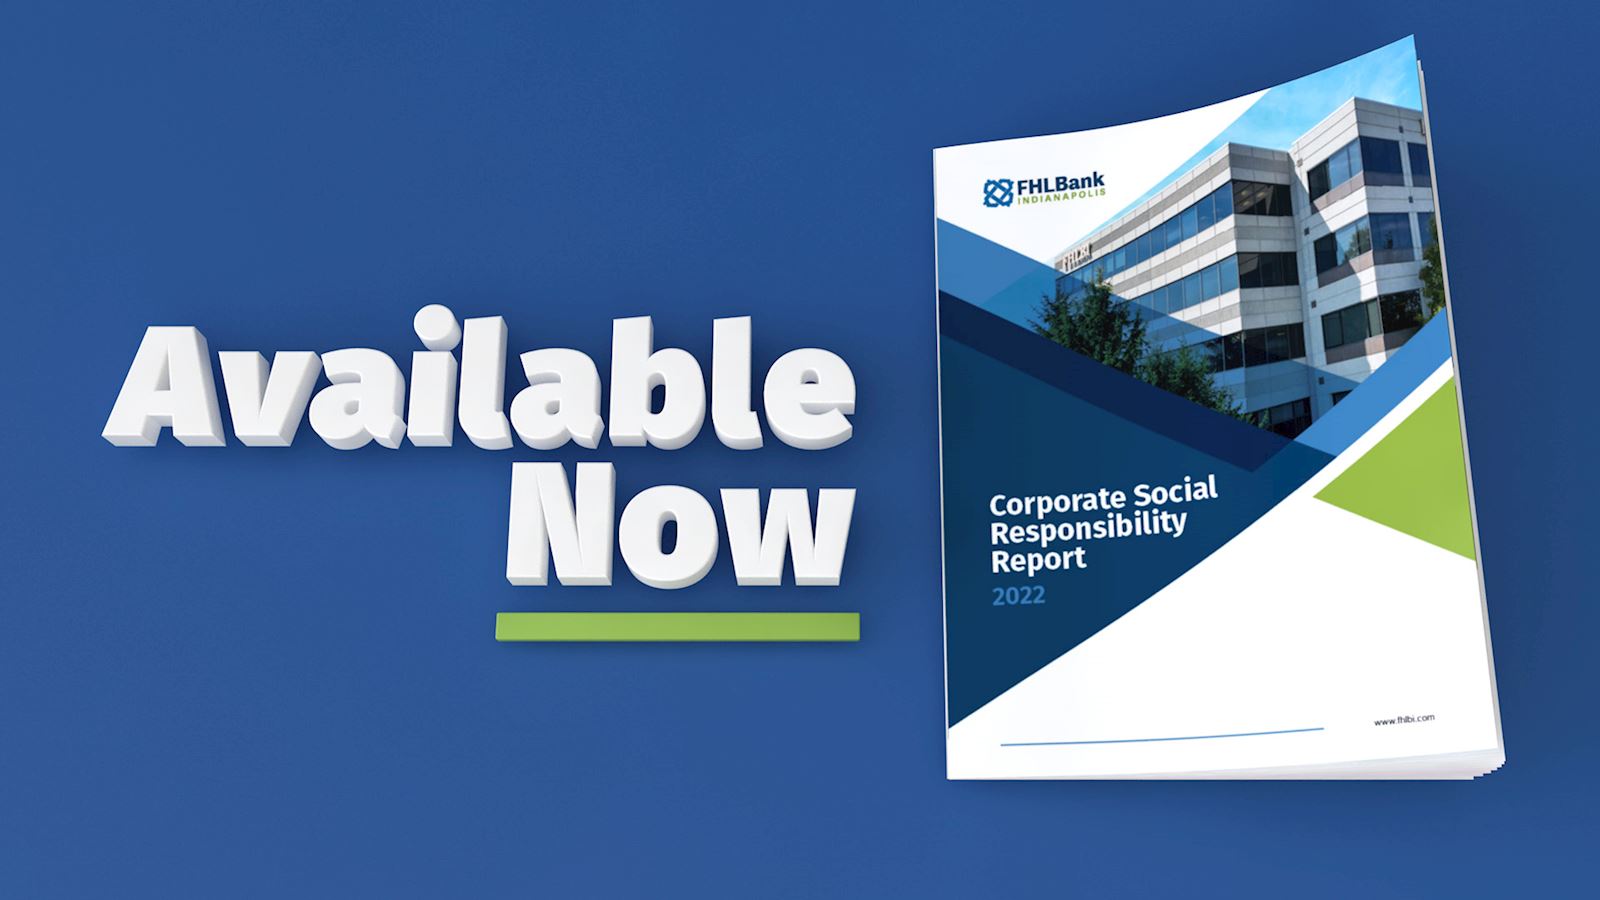 2022 Corporate Social Responsibility Report released